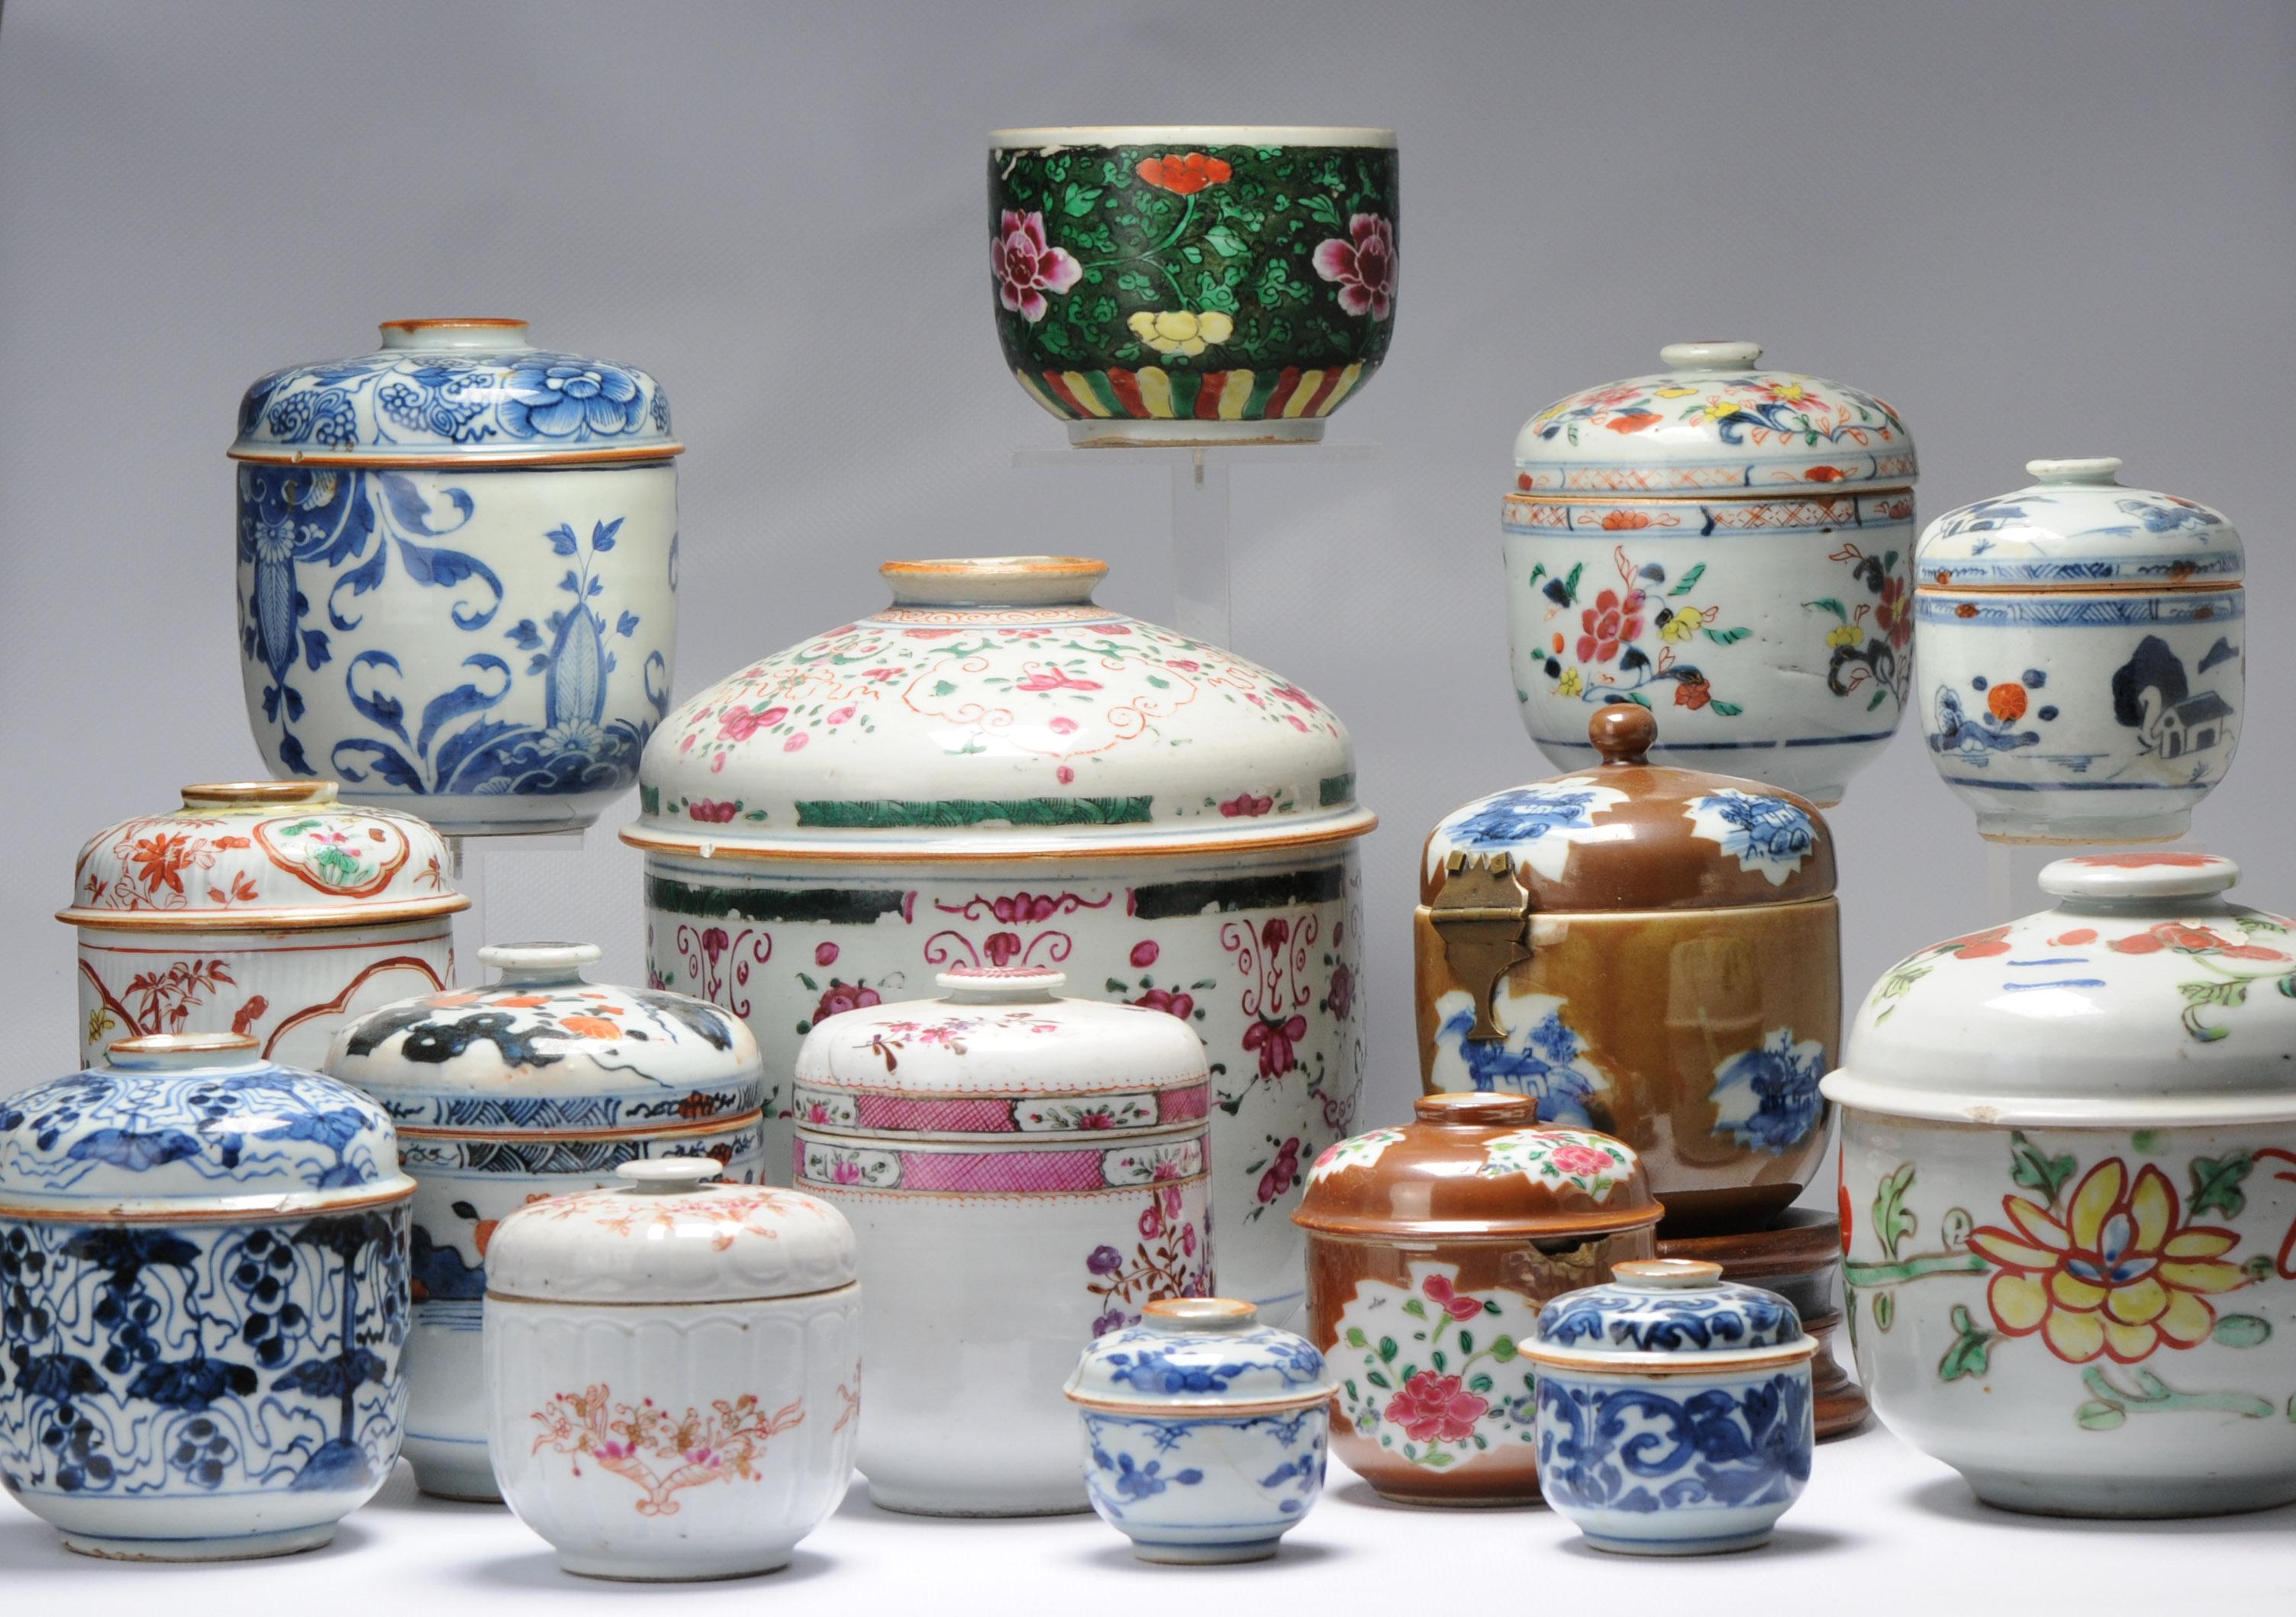 Description

Collected by us personally in the last 8 years. Great example of the variety of porcelain made during the 18th century. All from the 18th century ranging from Kangxi to Qianlong. Fencai, to Imari, Batavian and Blue and White. European